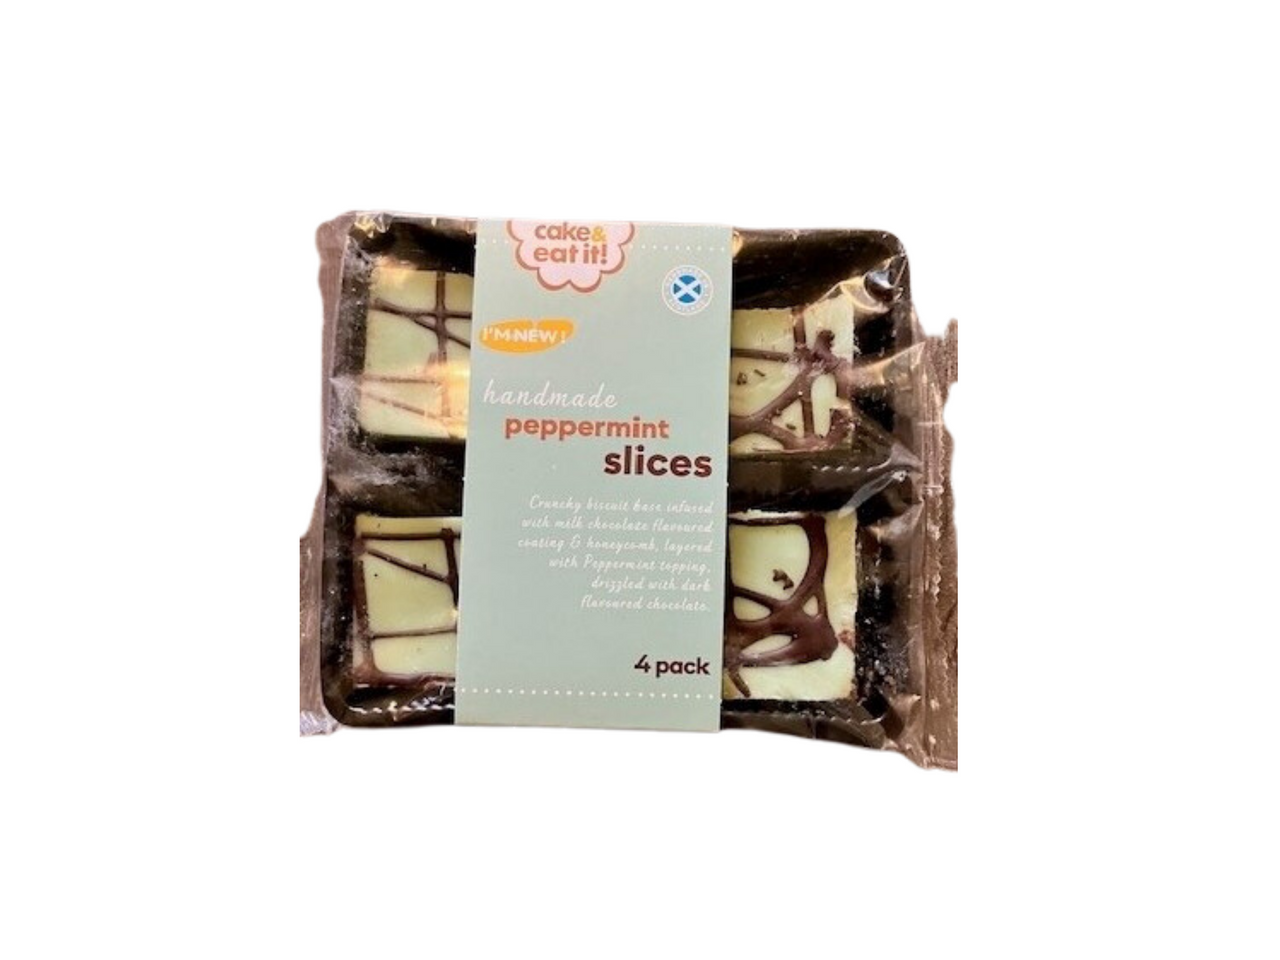 Cake & Eat It! Peppermint Slices 4 Pack (Sep - Dec 23) RRP £1.49 CLEARANCE XL 89p or 2 for £1.50